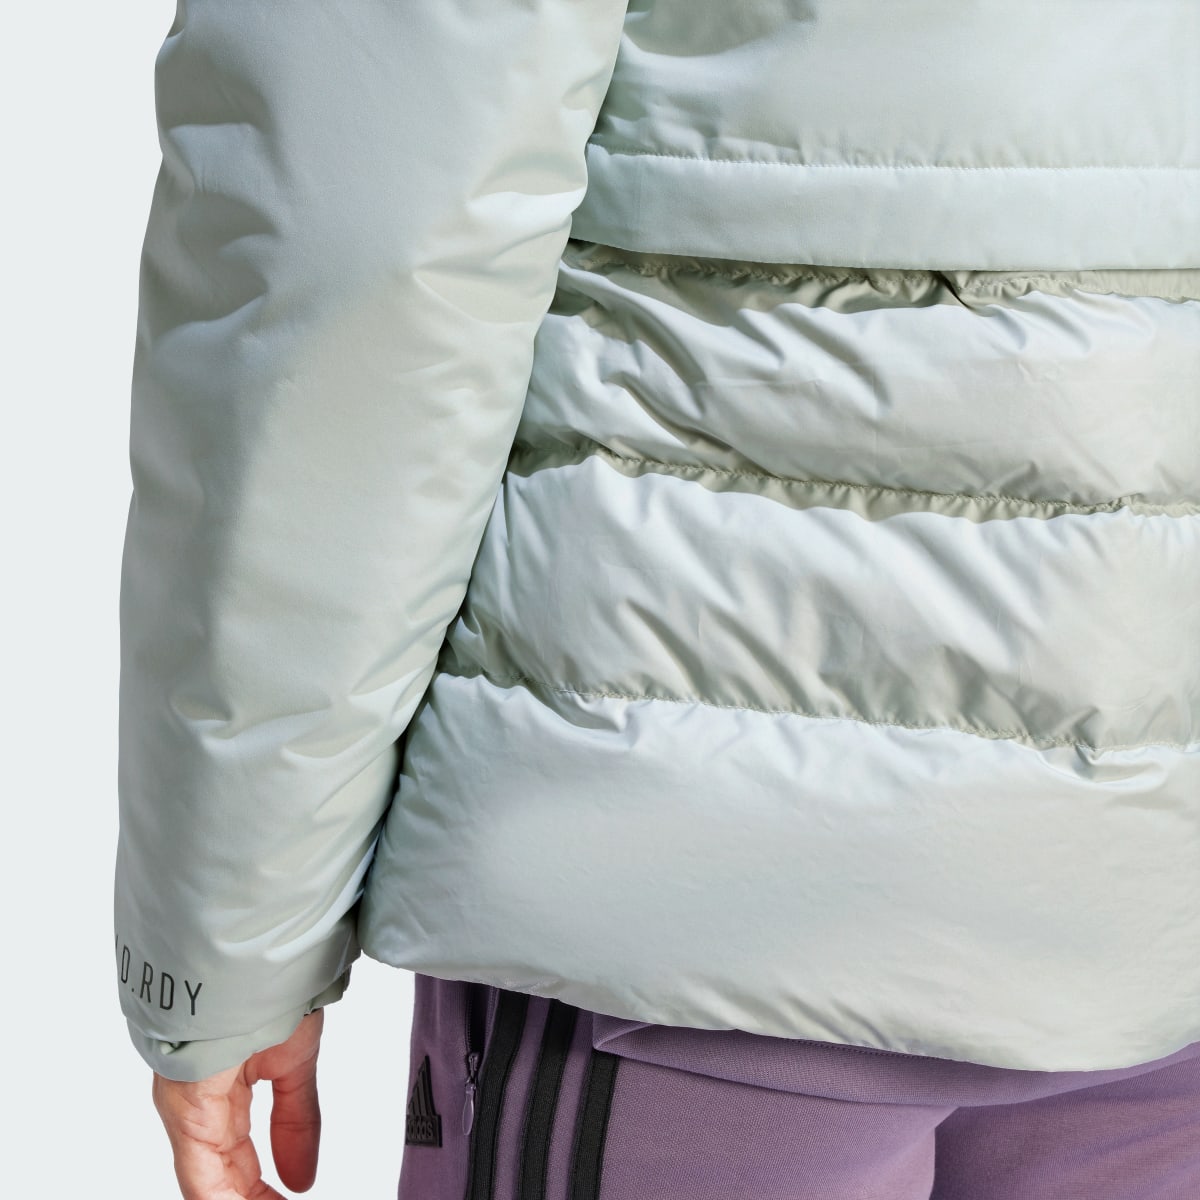 Adidas Traveer COLD.RDY Jacket. 9